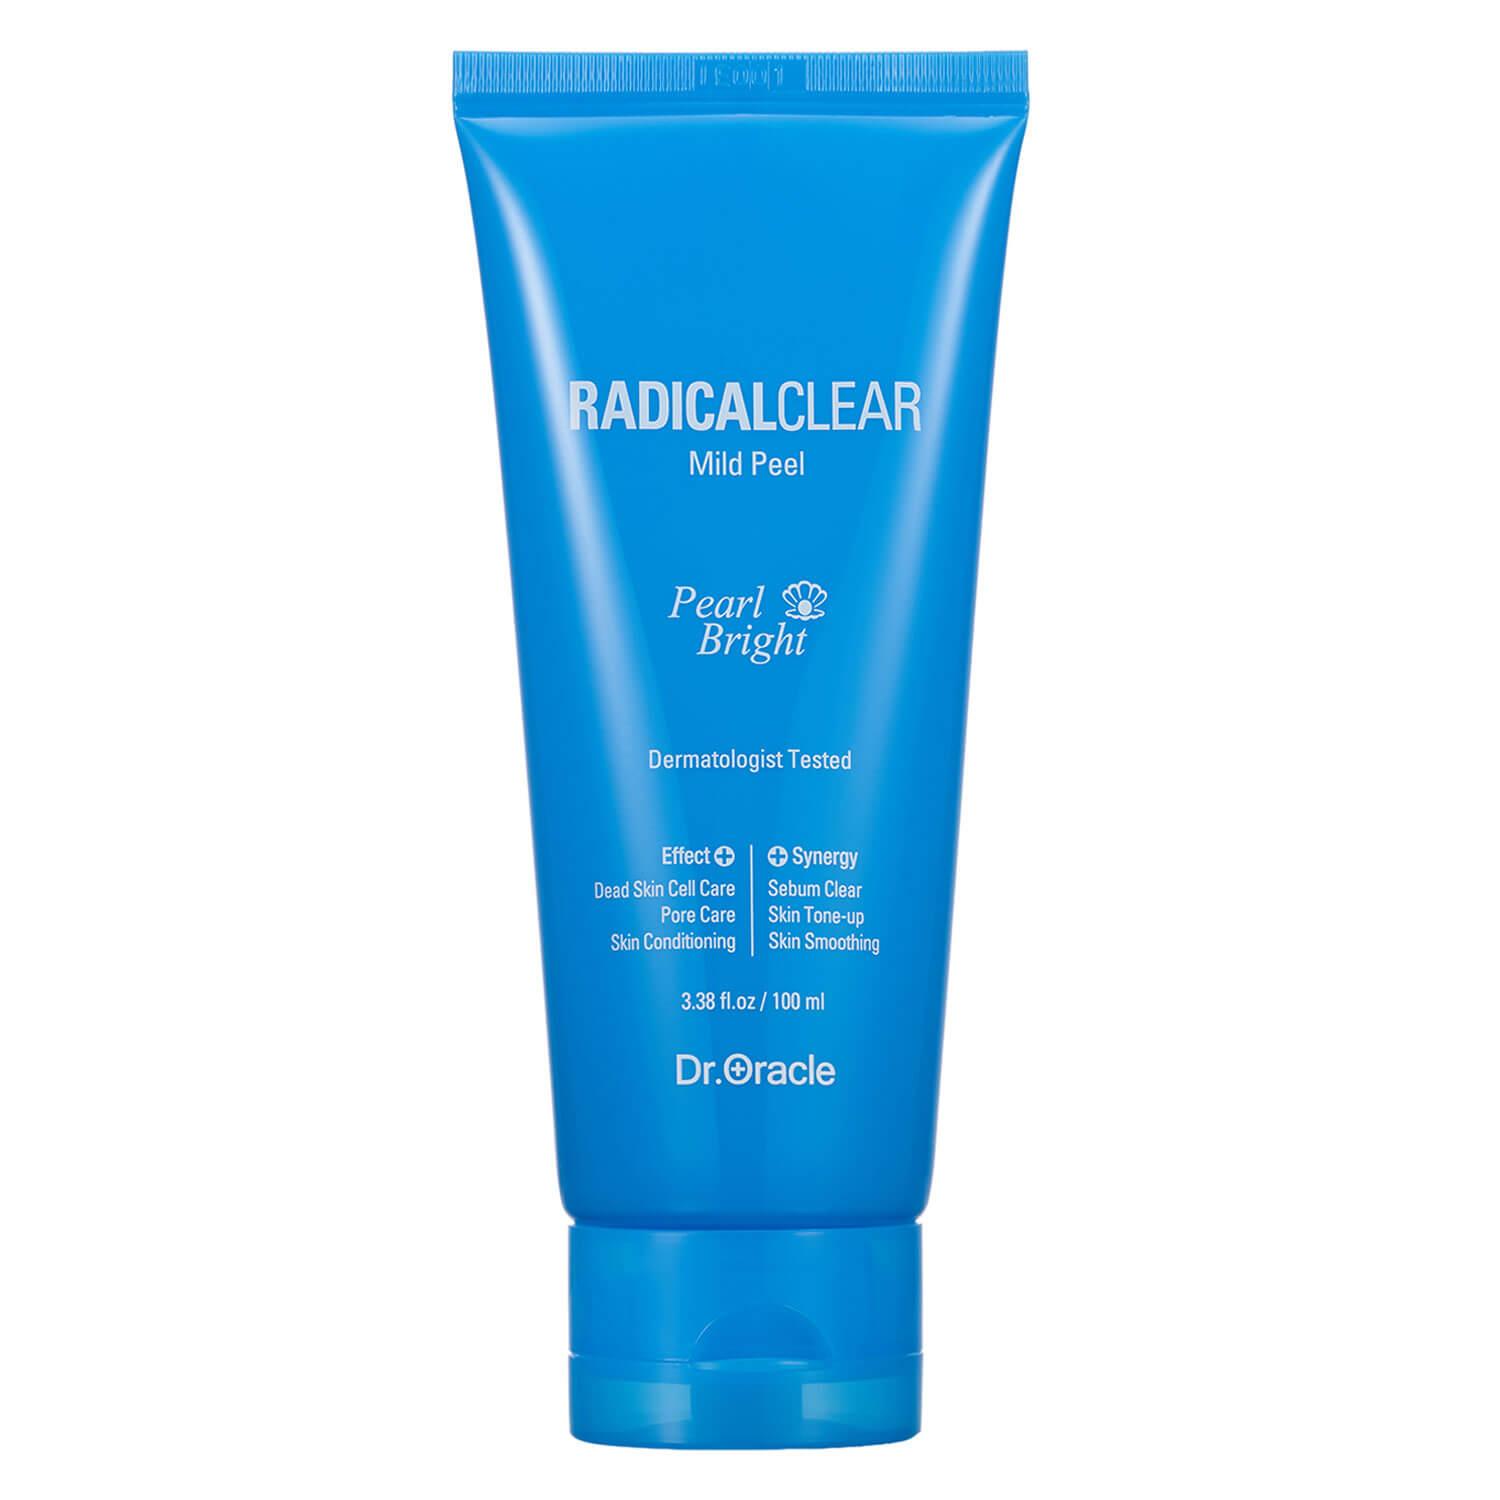 Dr. Oracle - Radicalclear Mild Peel Pearl Bright